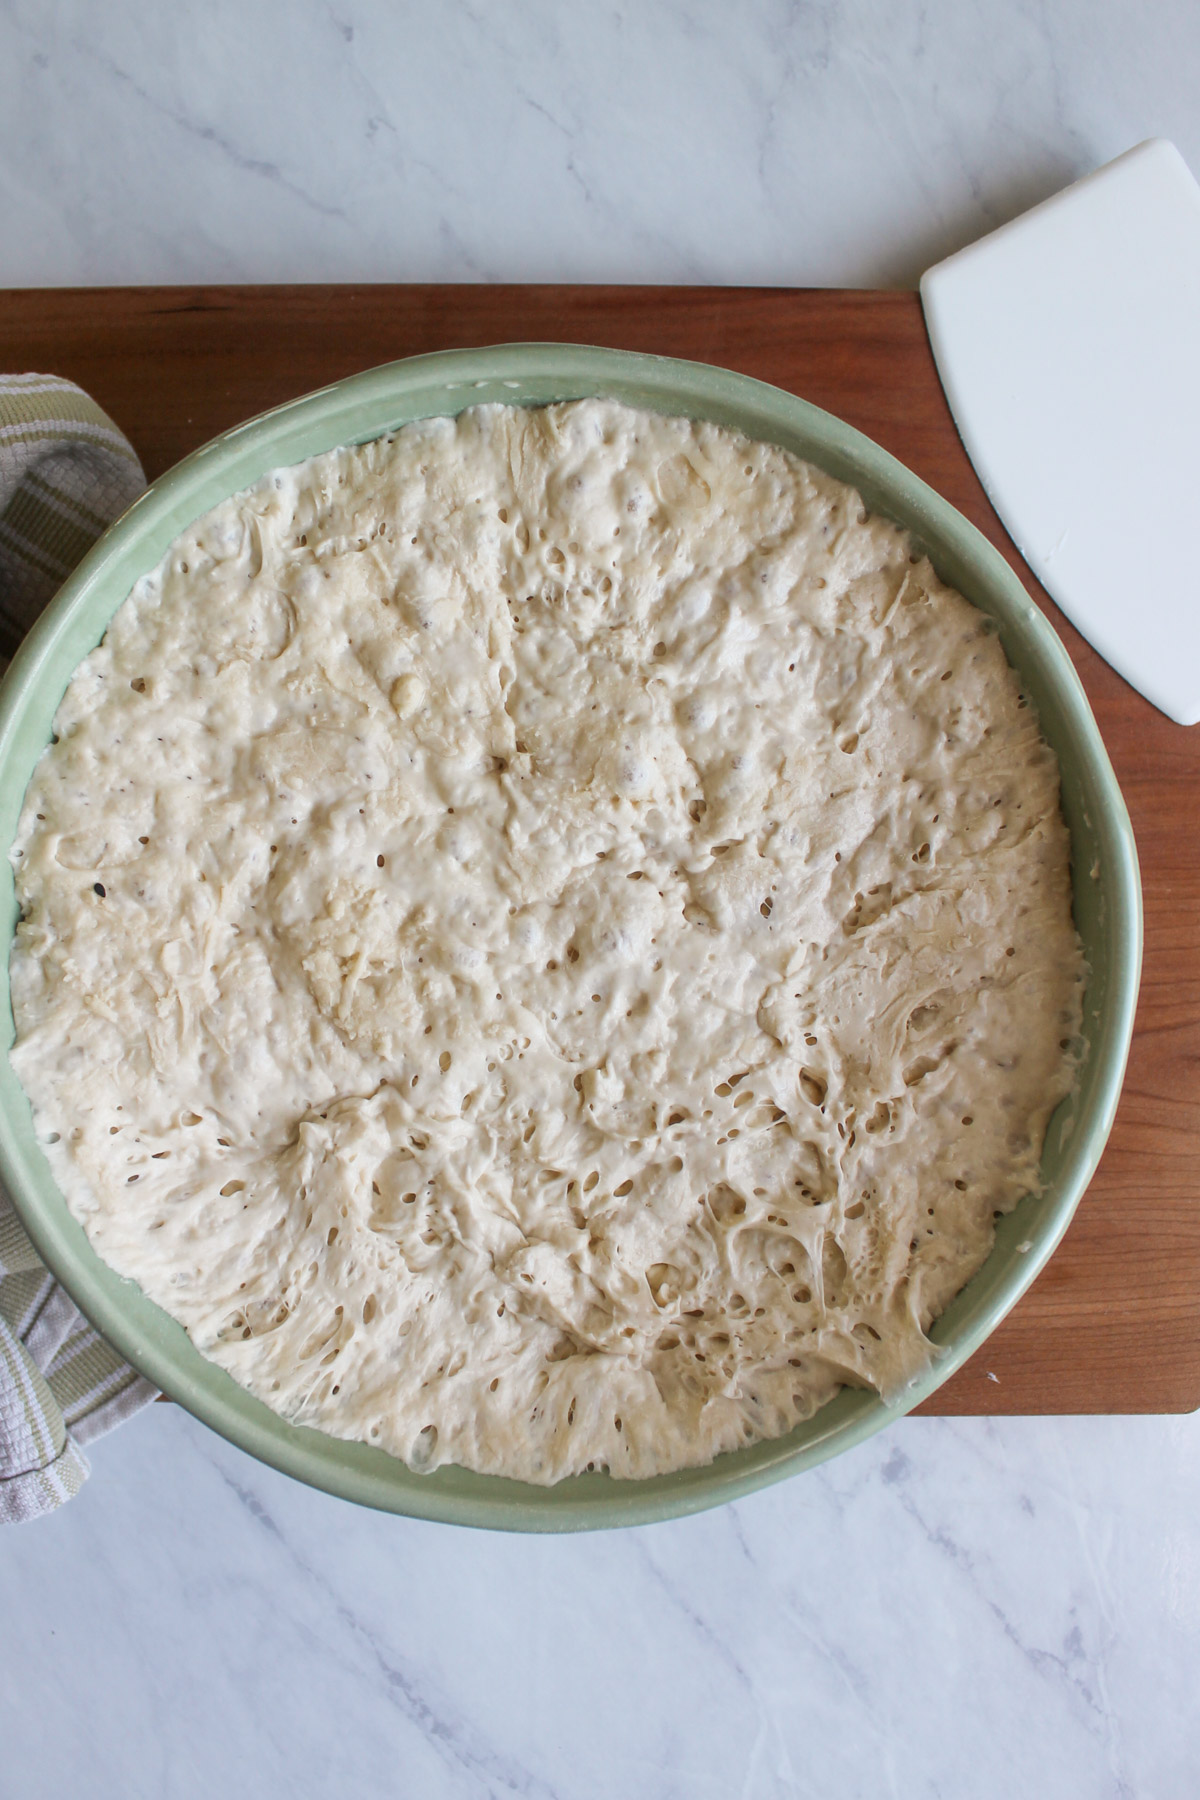 A bowl of bread dough doubled in size after sitting overnight.